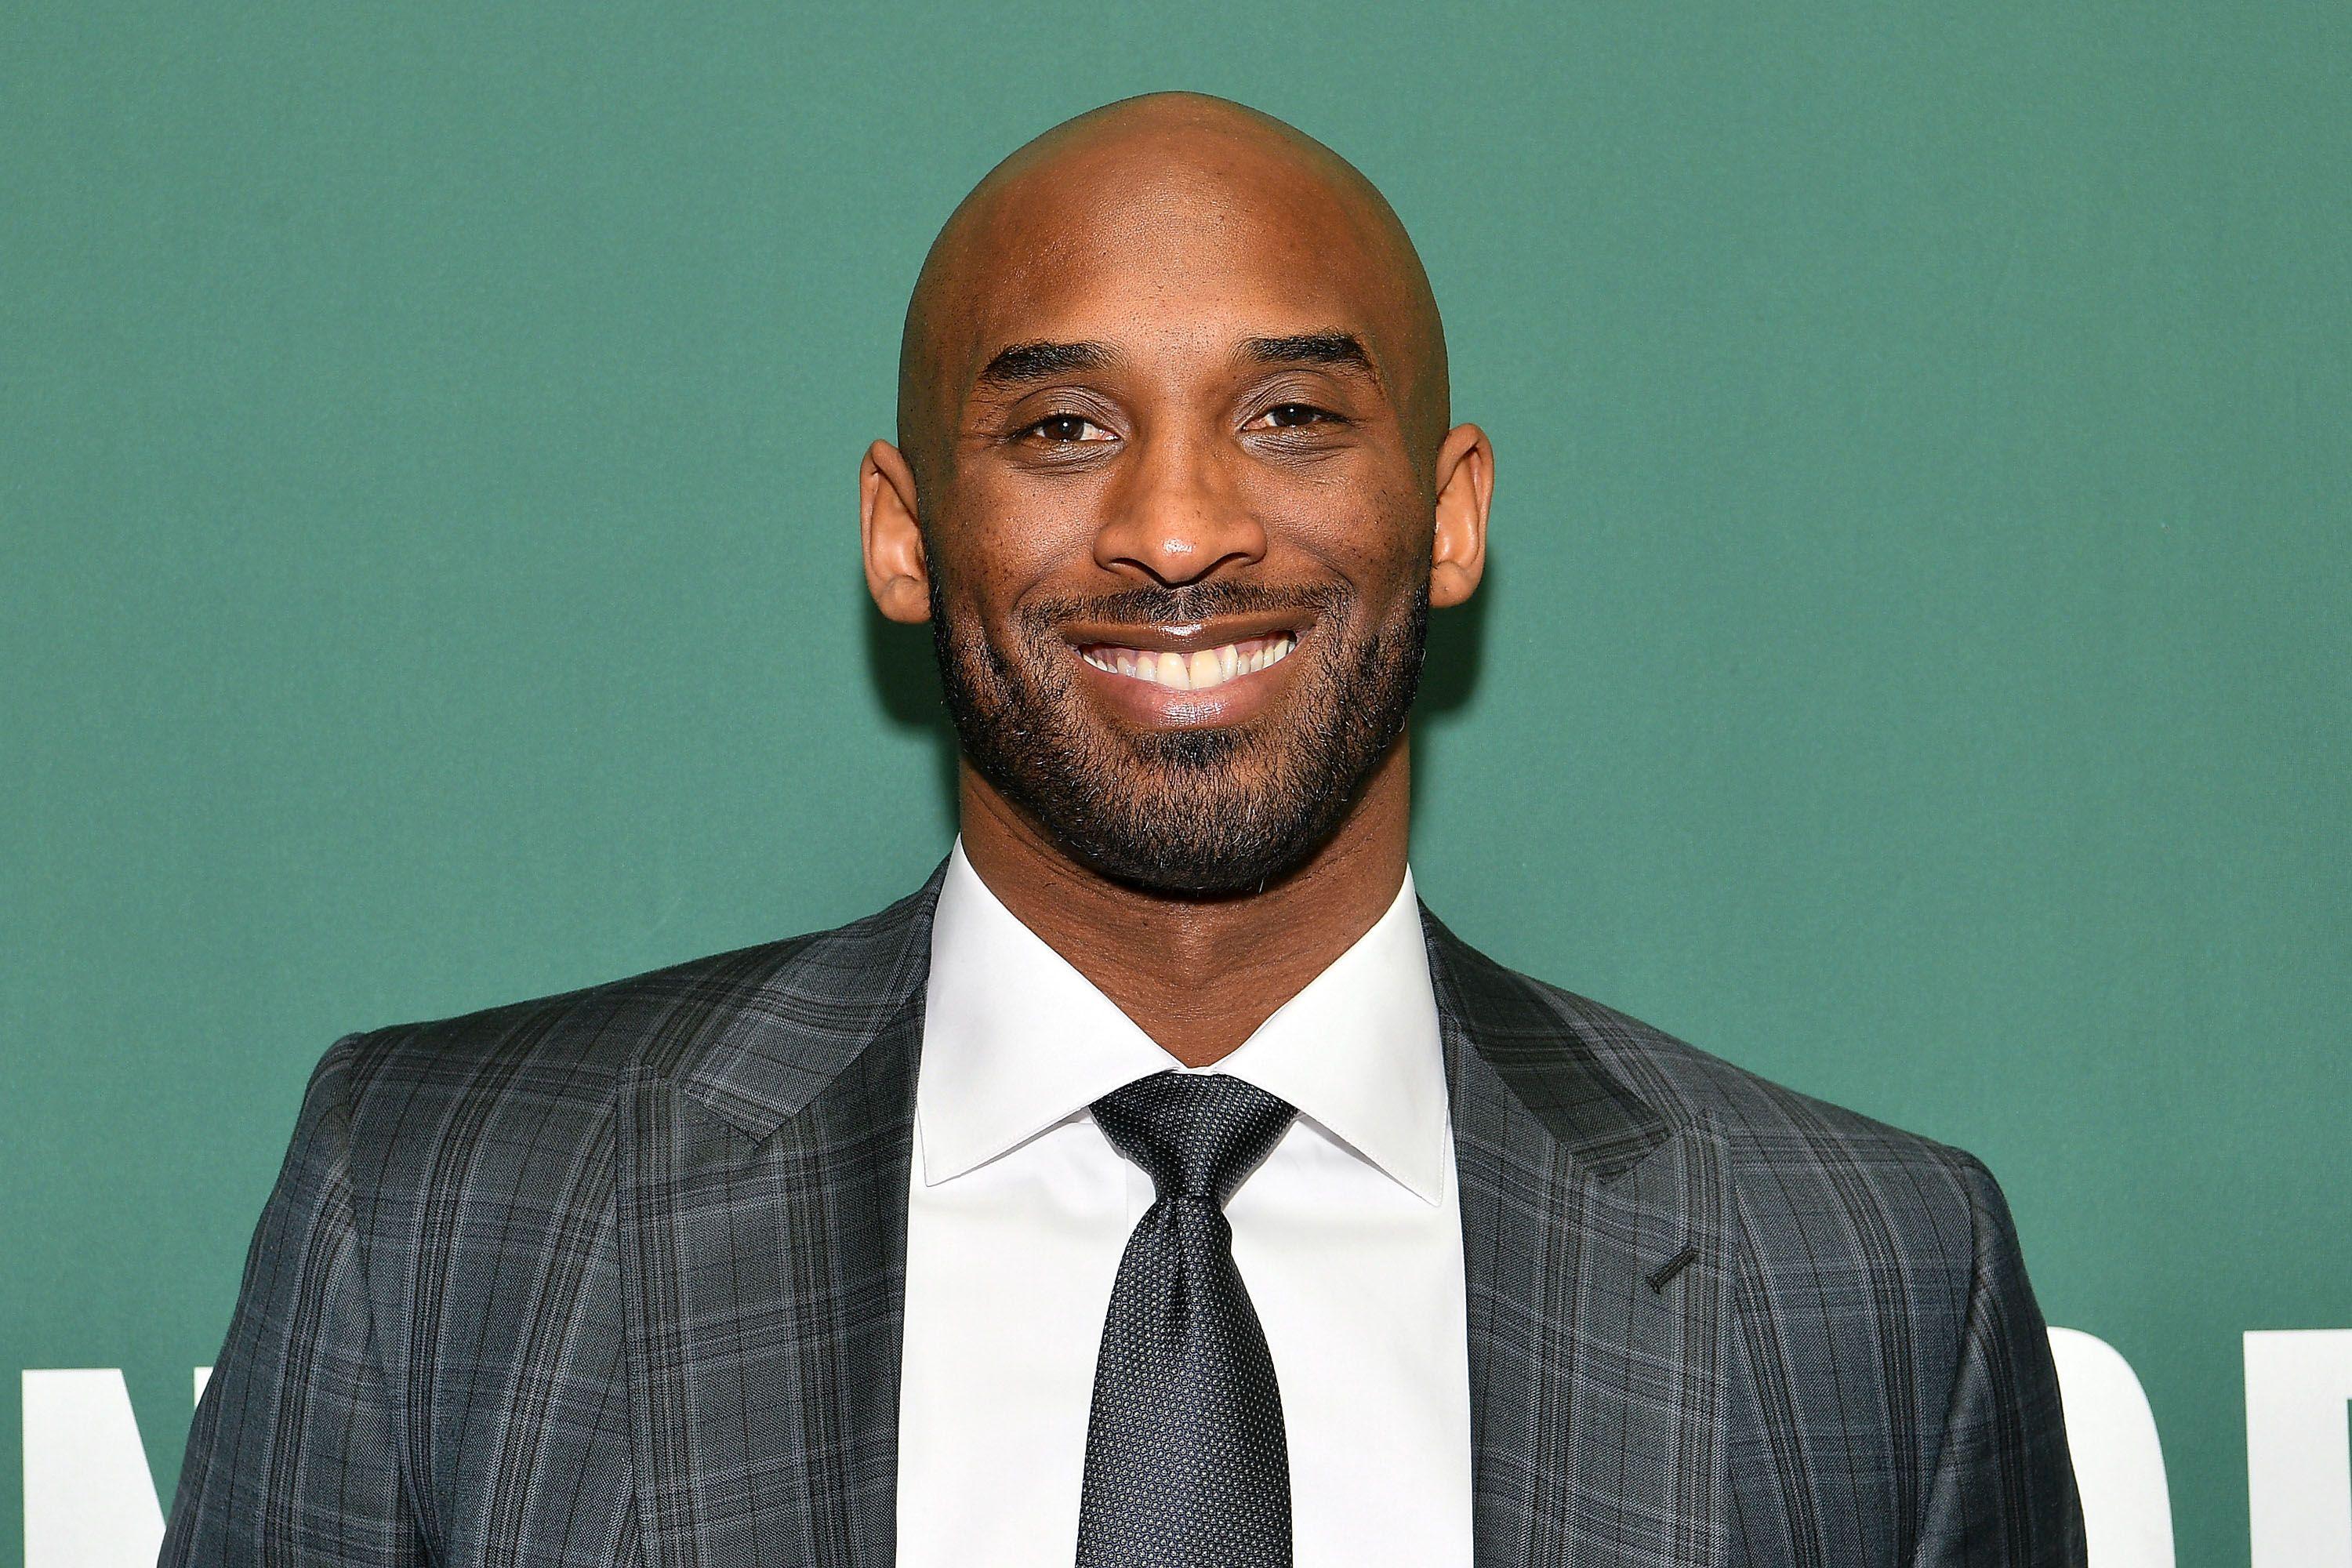 Kobe Bryant Has Been Killed in a Helicopter Crash at Age 41